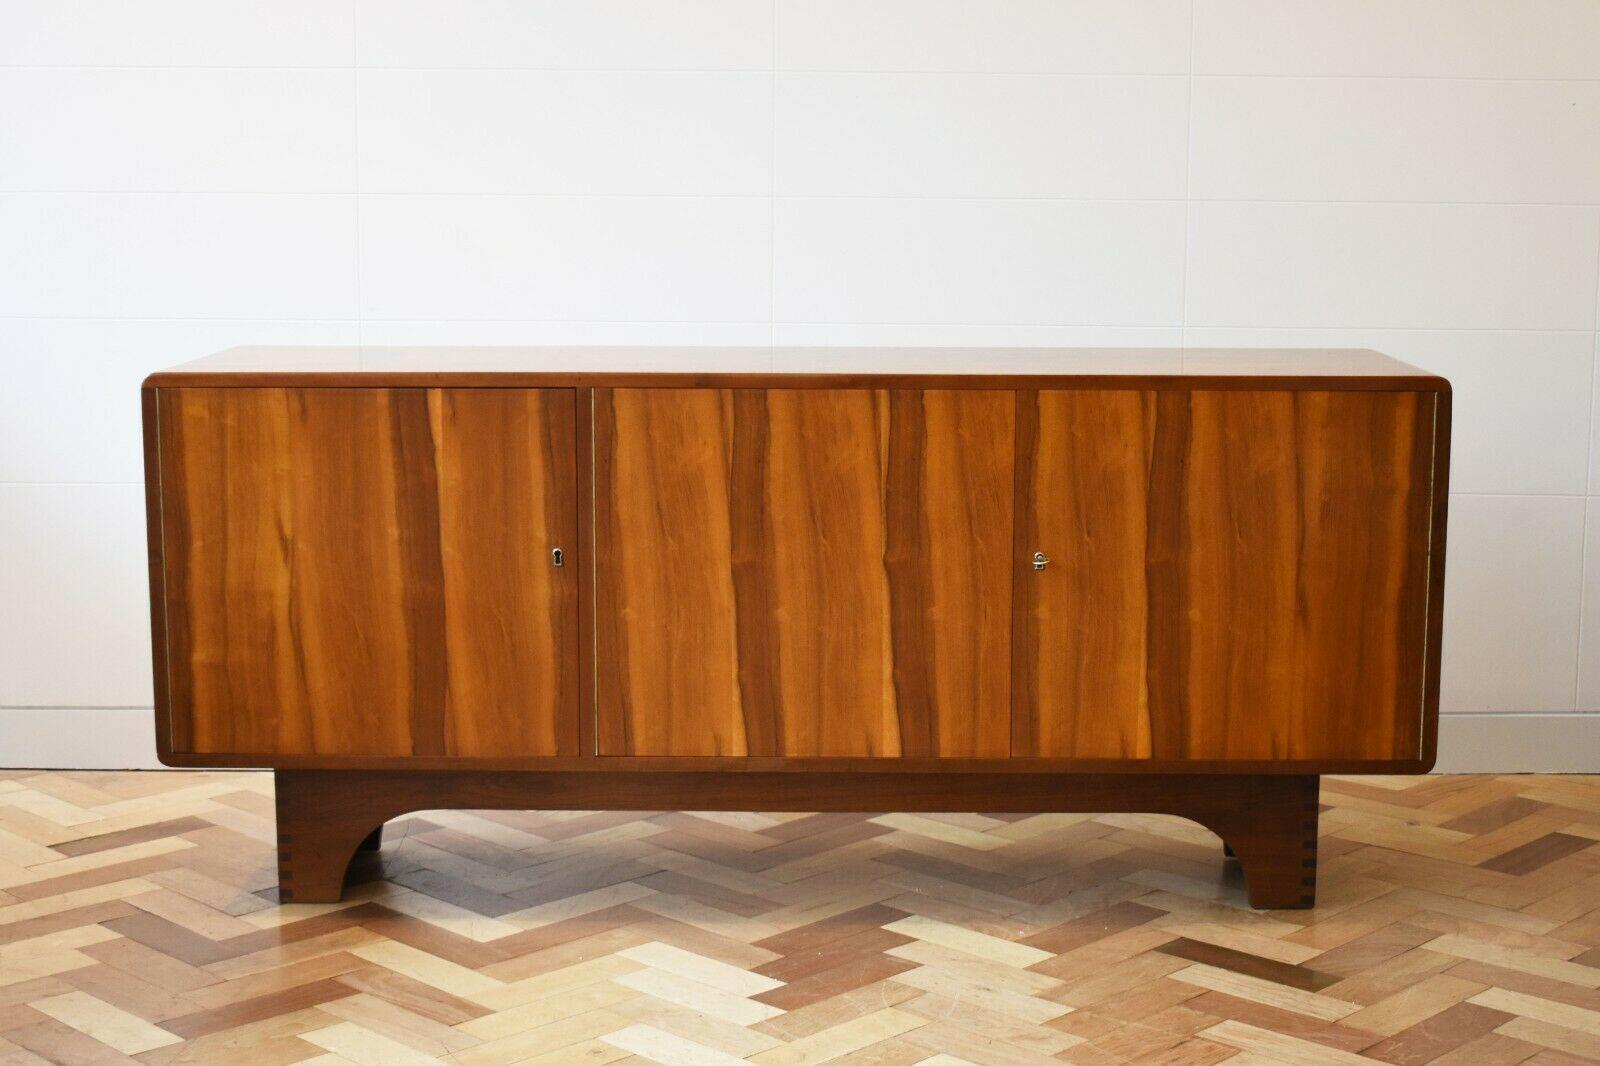 1950s Mid-Century Modern Italian walnut sideboard, in an Art Deco style

This rare 1950s walnut sideboard boasts a beautiful wood grain, whilst its curved corners add to its modernist elegance. 

With a range of storage spaces, 3 cupboards - one